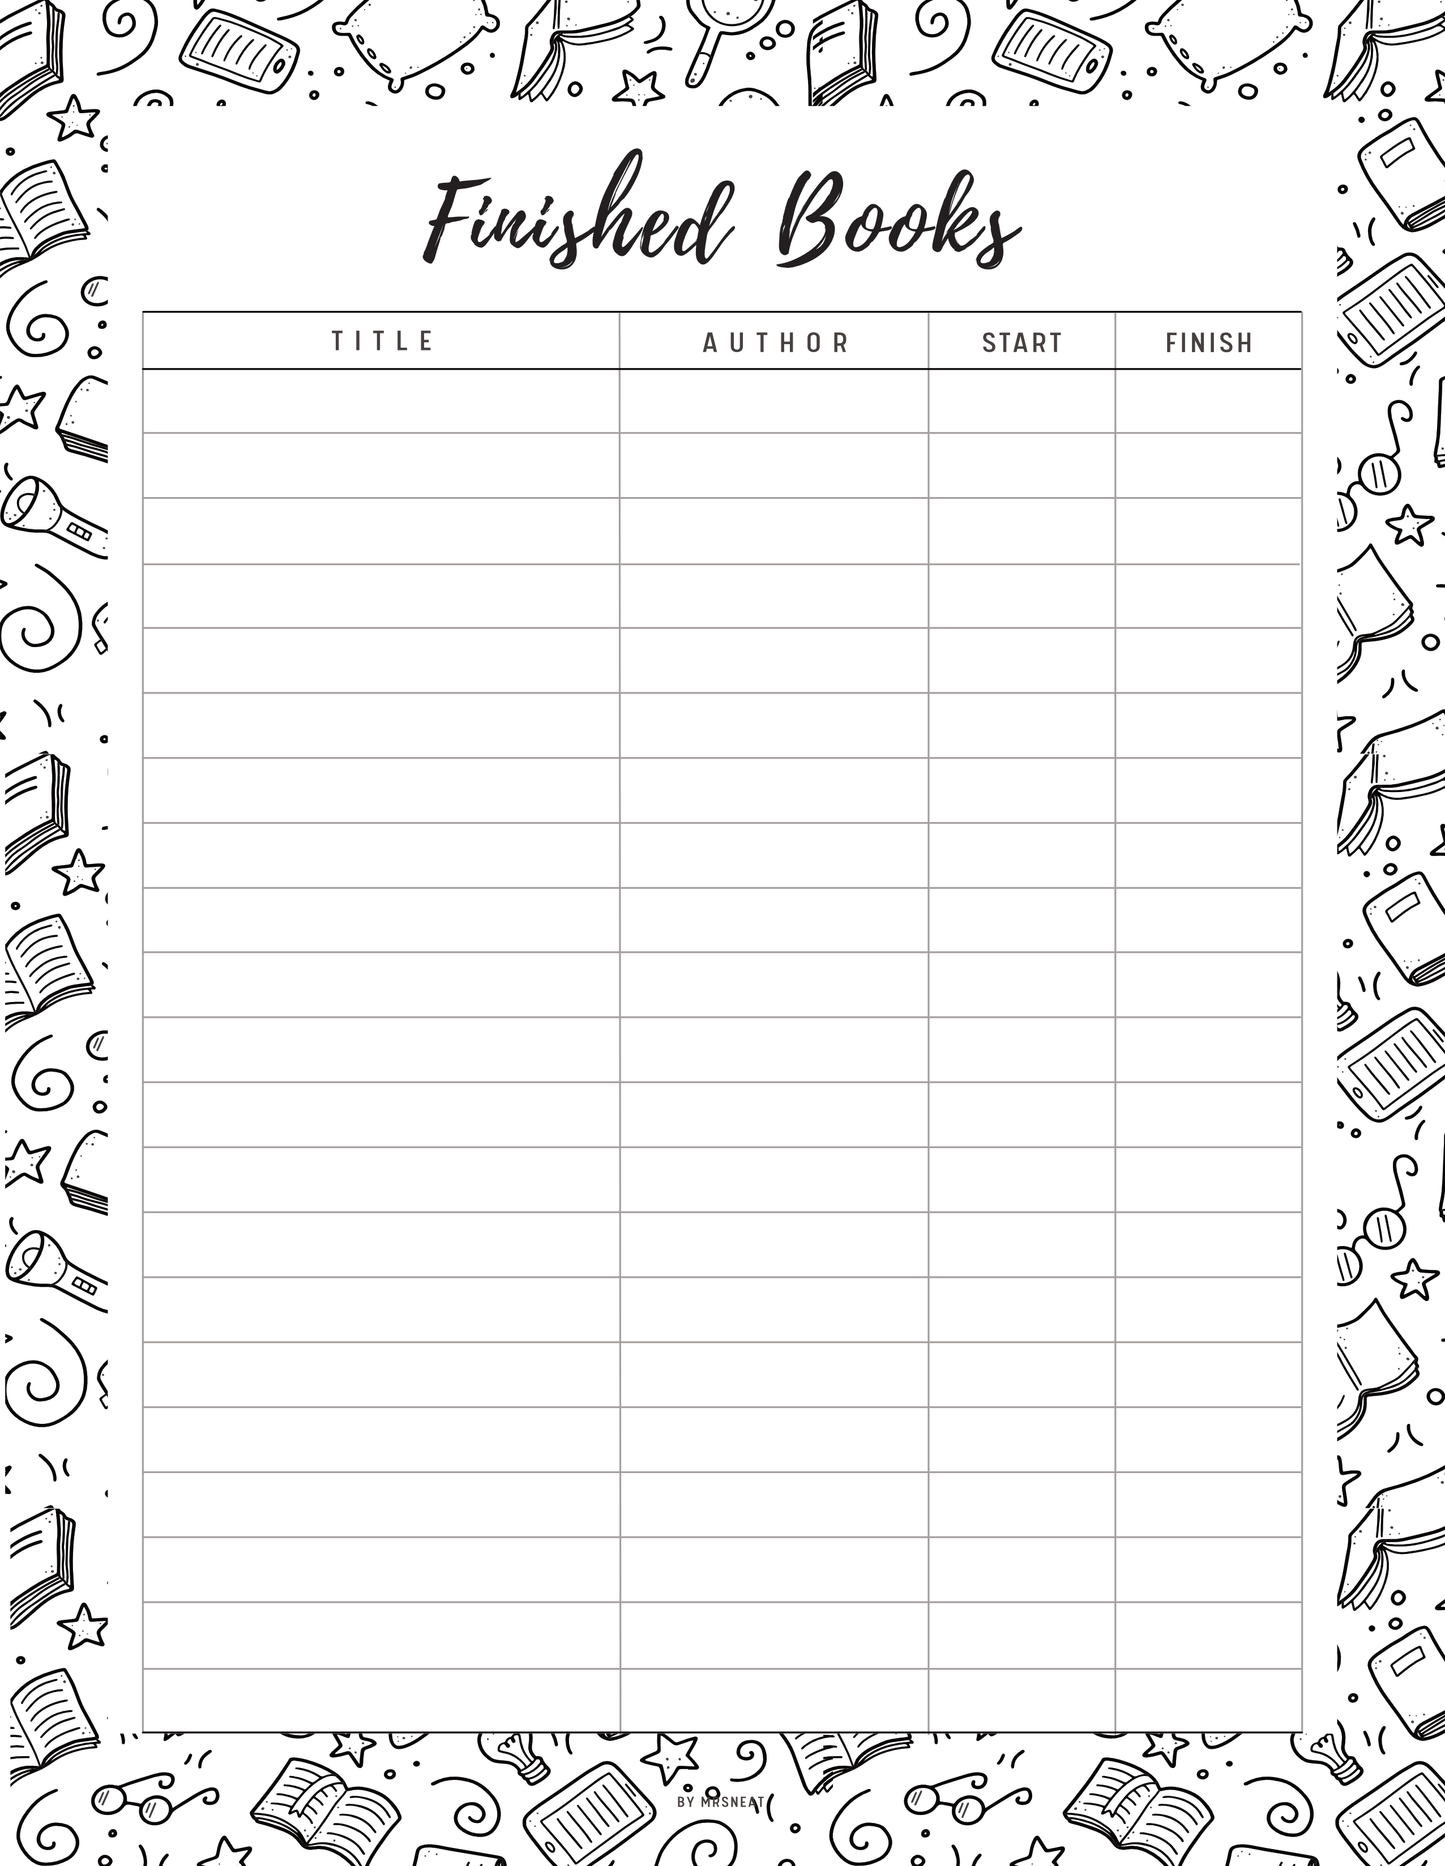 Books I have Read Template Printable, 5 colors ; Peach, Pink, Blue, Green, Neutral, 4 sizes ; A4, A5, Letter, Half Letter, Digital Planner